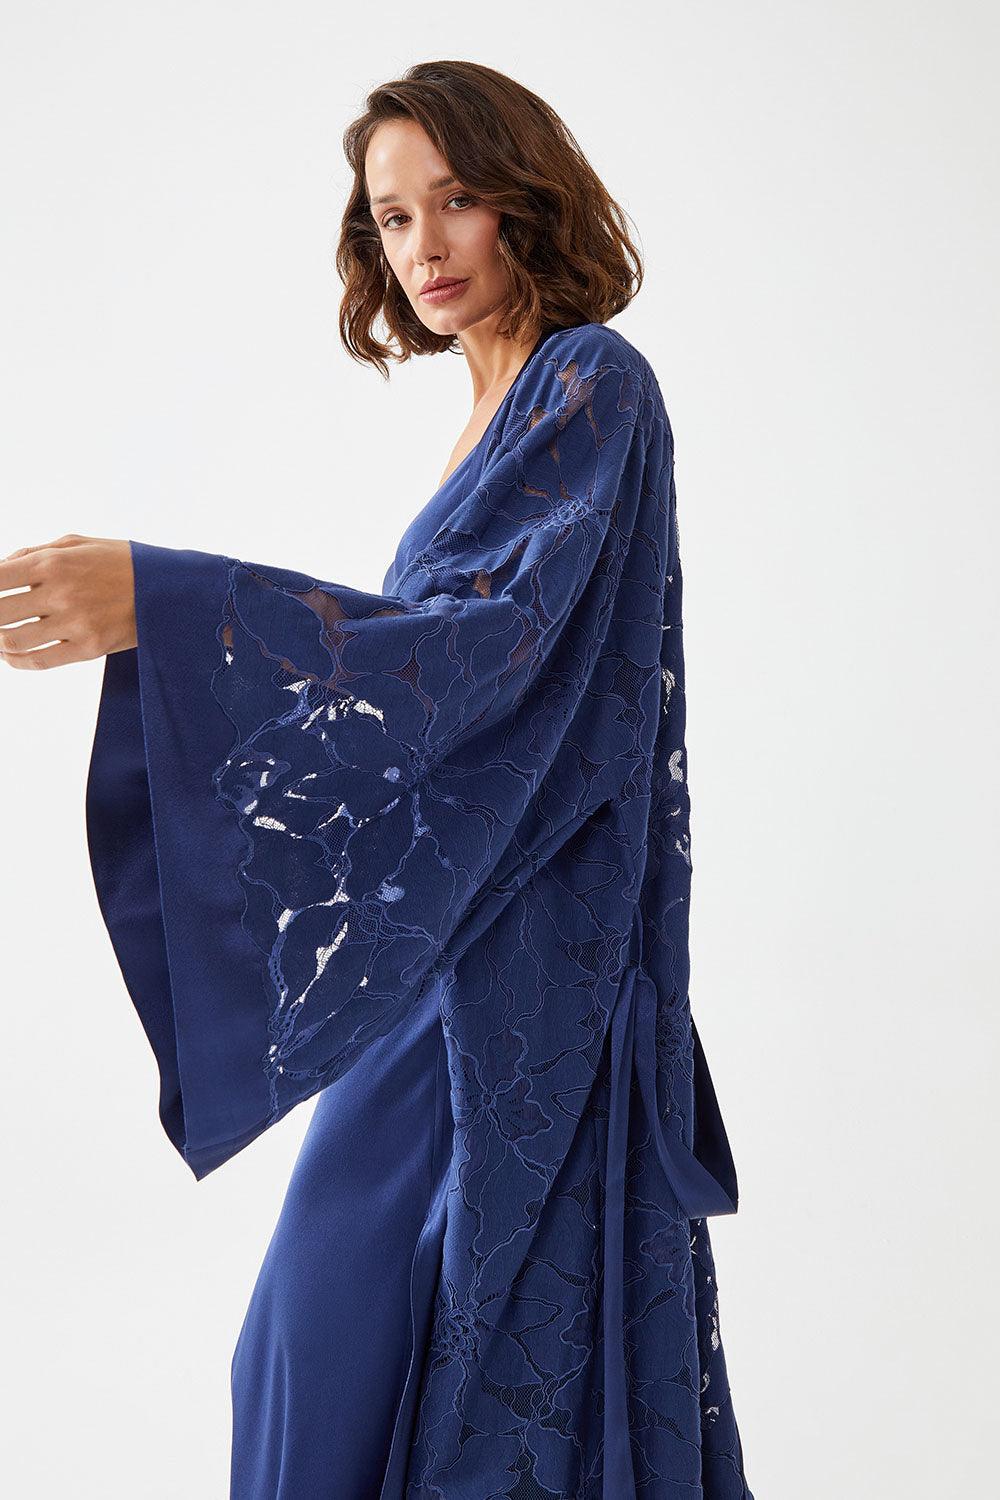 Clematis Long Rayon Full Trimmed with Lace Robe Set - Navy Blue - Bocan